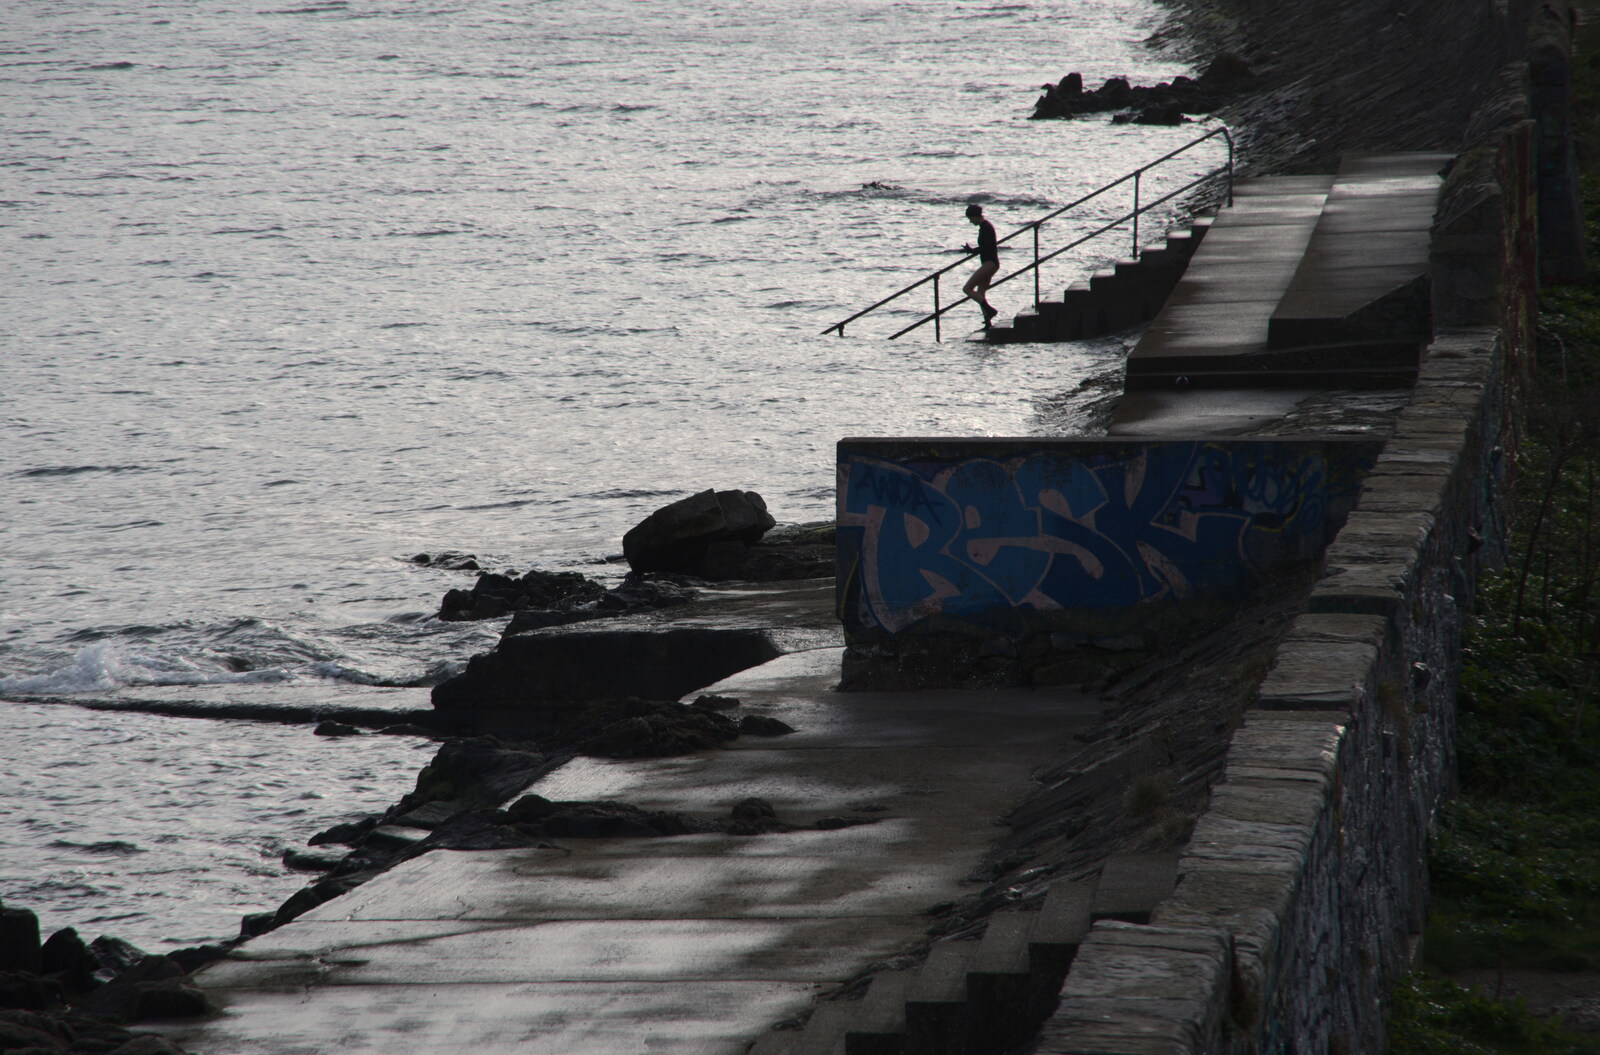 The Dead Zoo, Dublin, Ireland - 17th February 2023: One of Evelyn's swimming chums heads into the sea